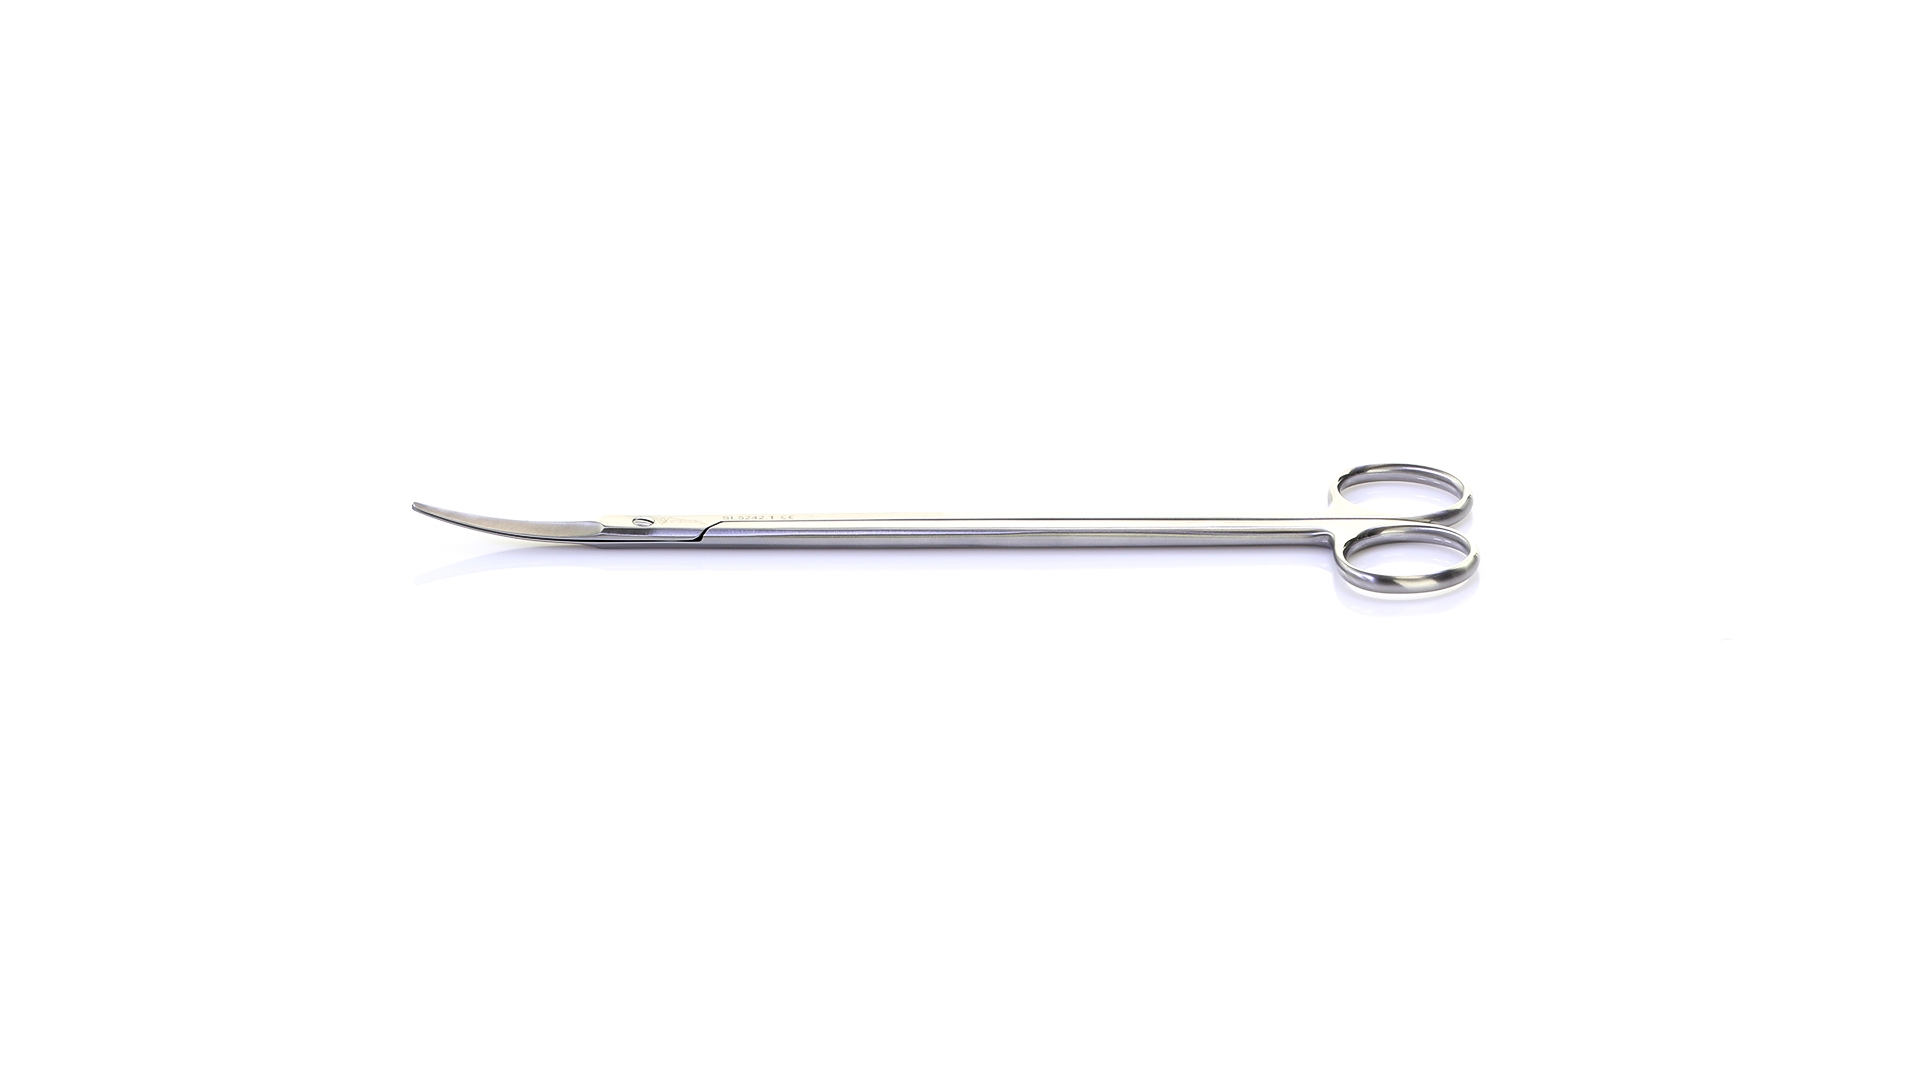 Potts Smith Dissecting Scissors - Curved Beveled Blades w/Blunt tips